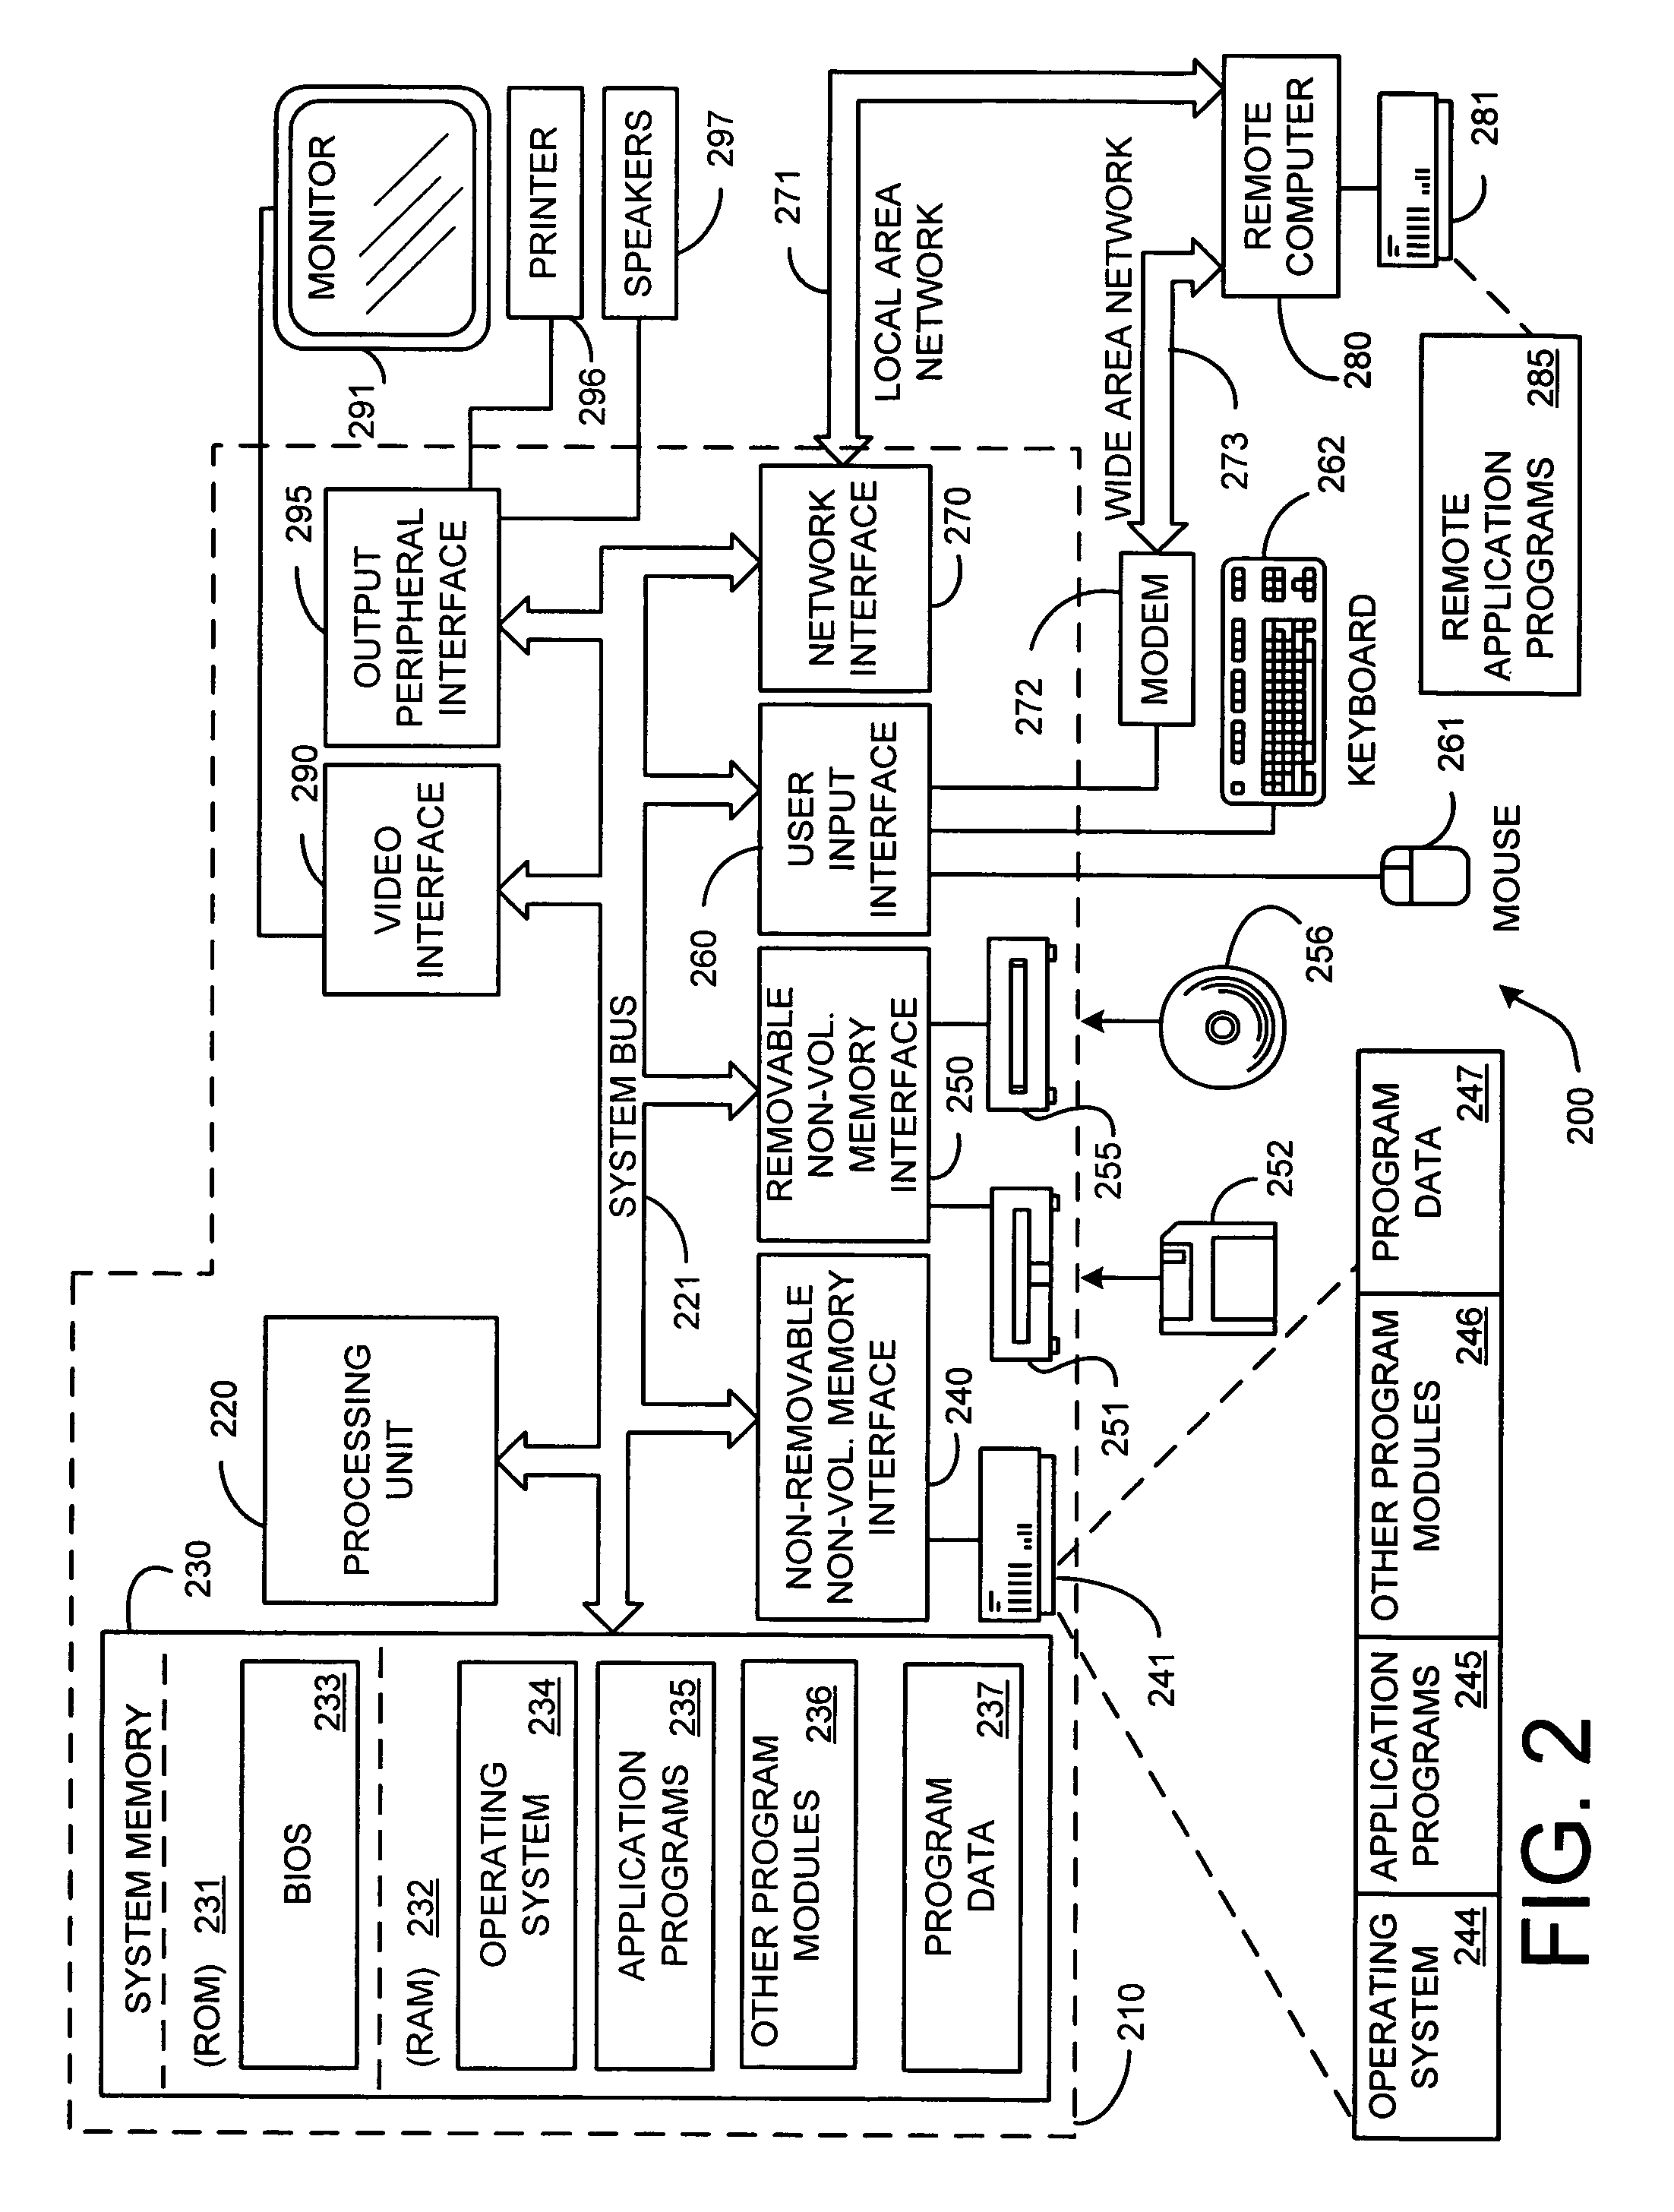 Automatic digital image grouping using criteria based on image metadata and spatial information